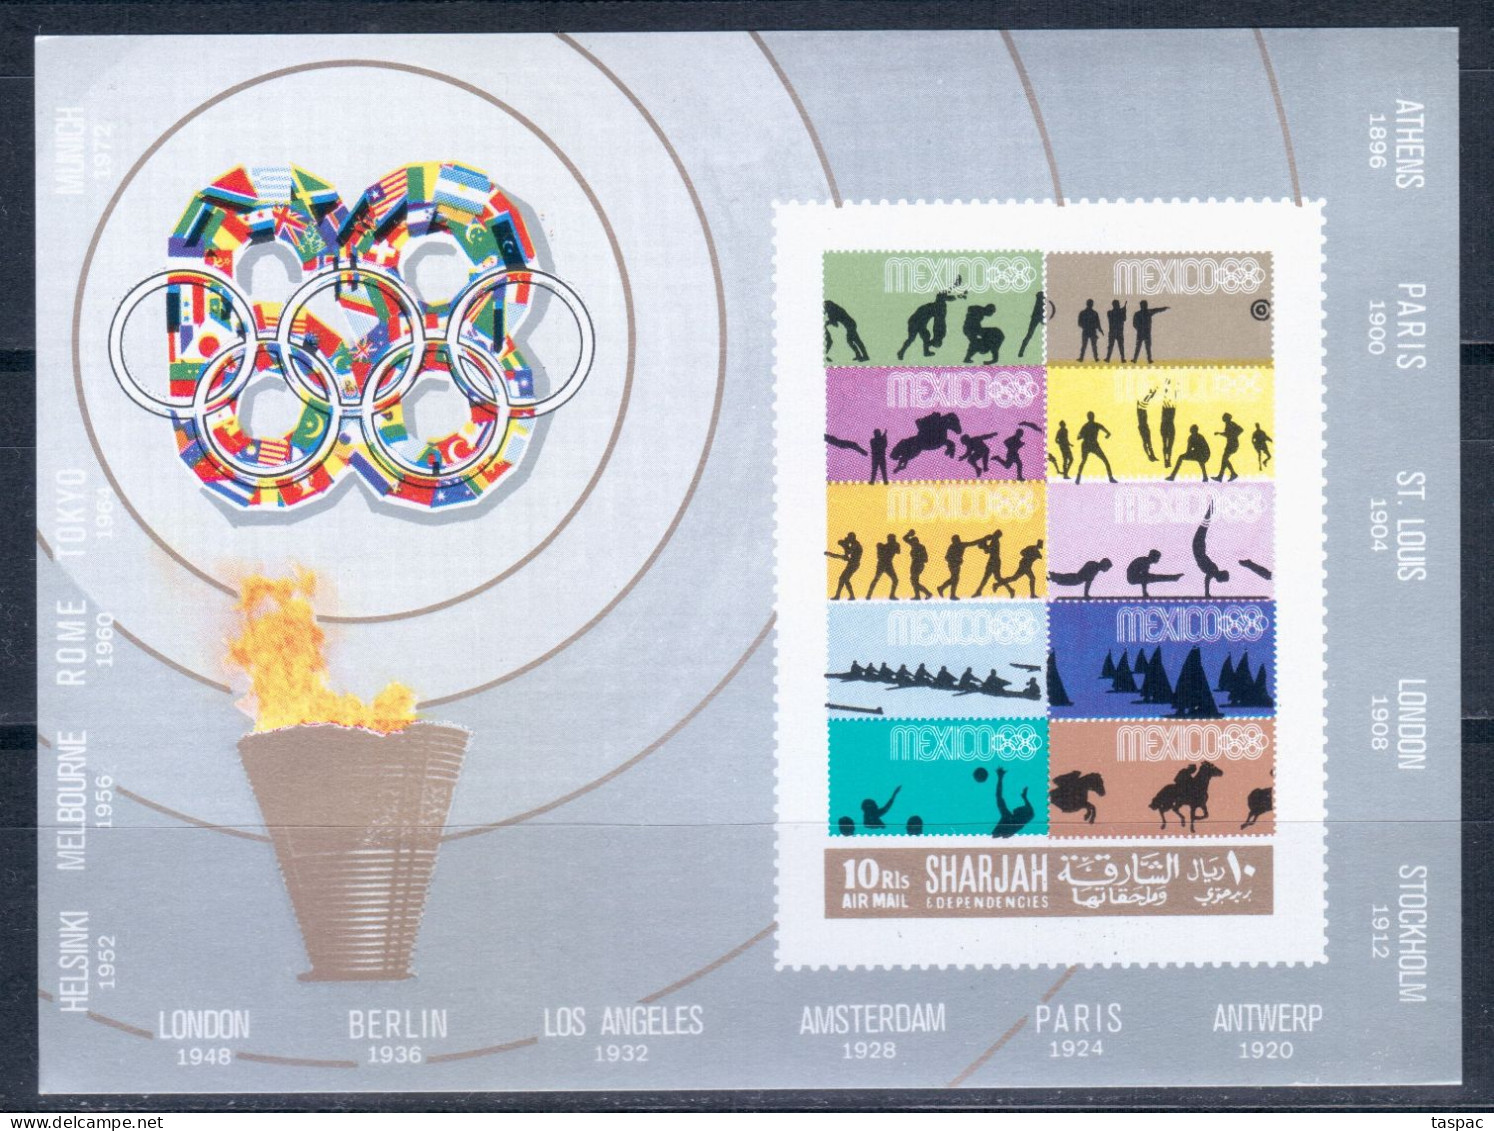 Sharjah 1968 Mi# Block 43 B ** MNH - Imperf. - Summer Olympics, Mexico '68 / Stamps On Stamps - Schardscha